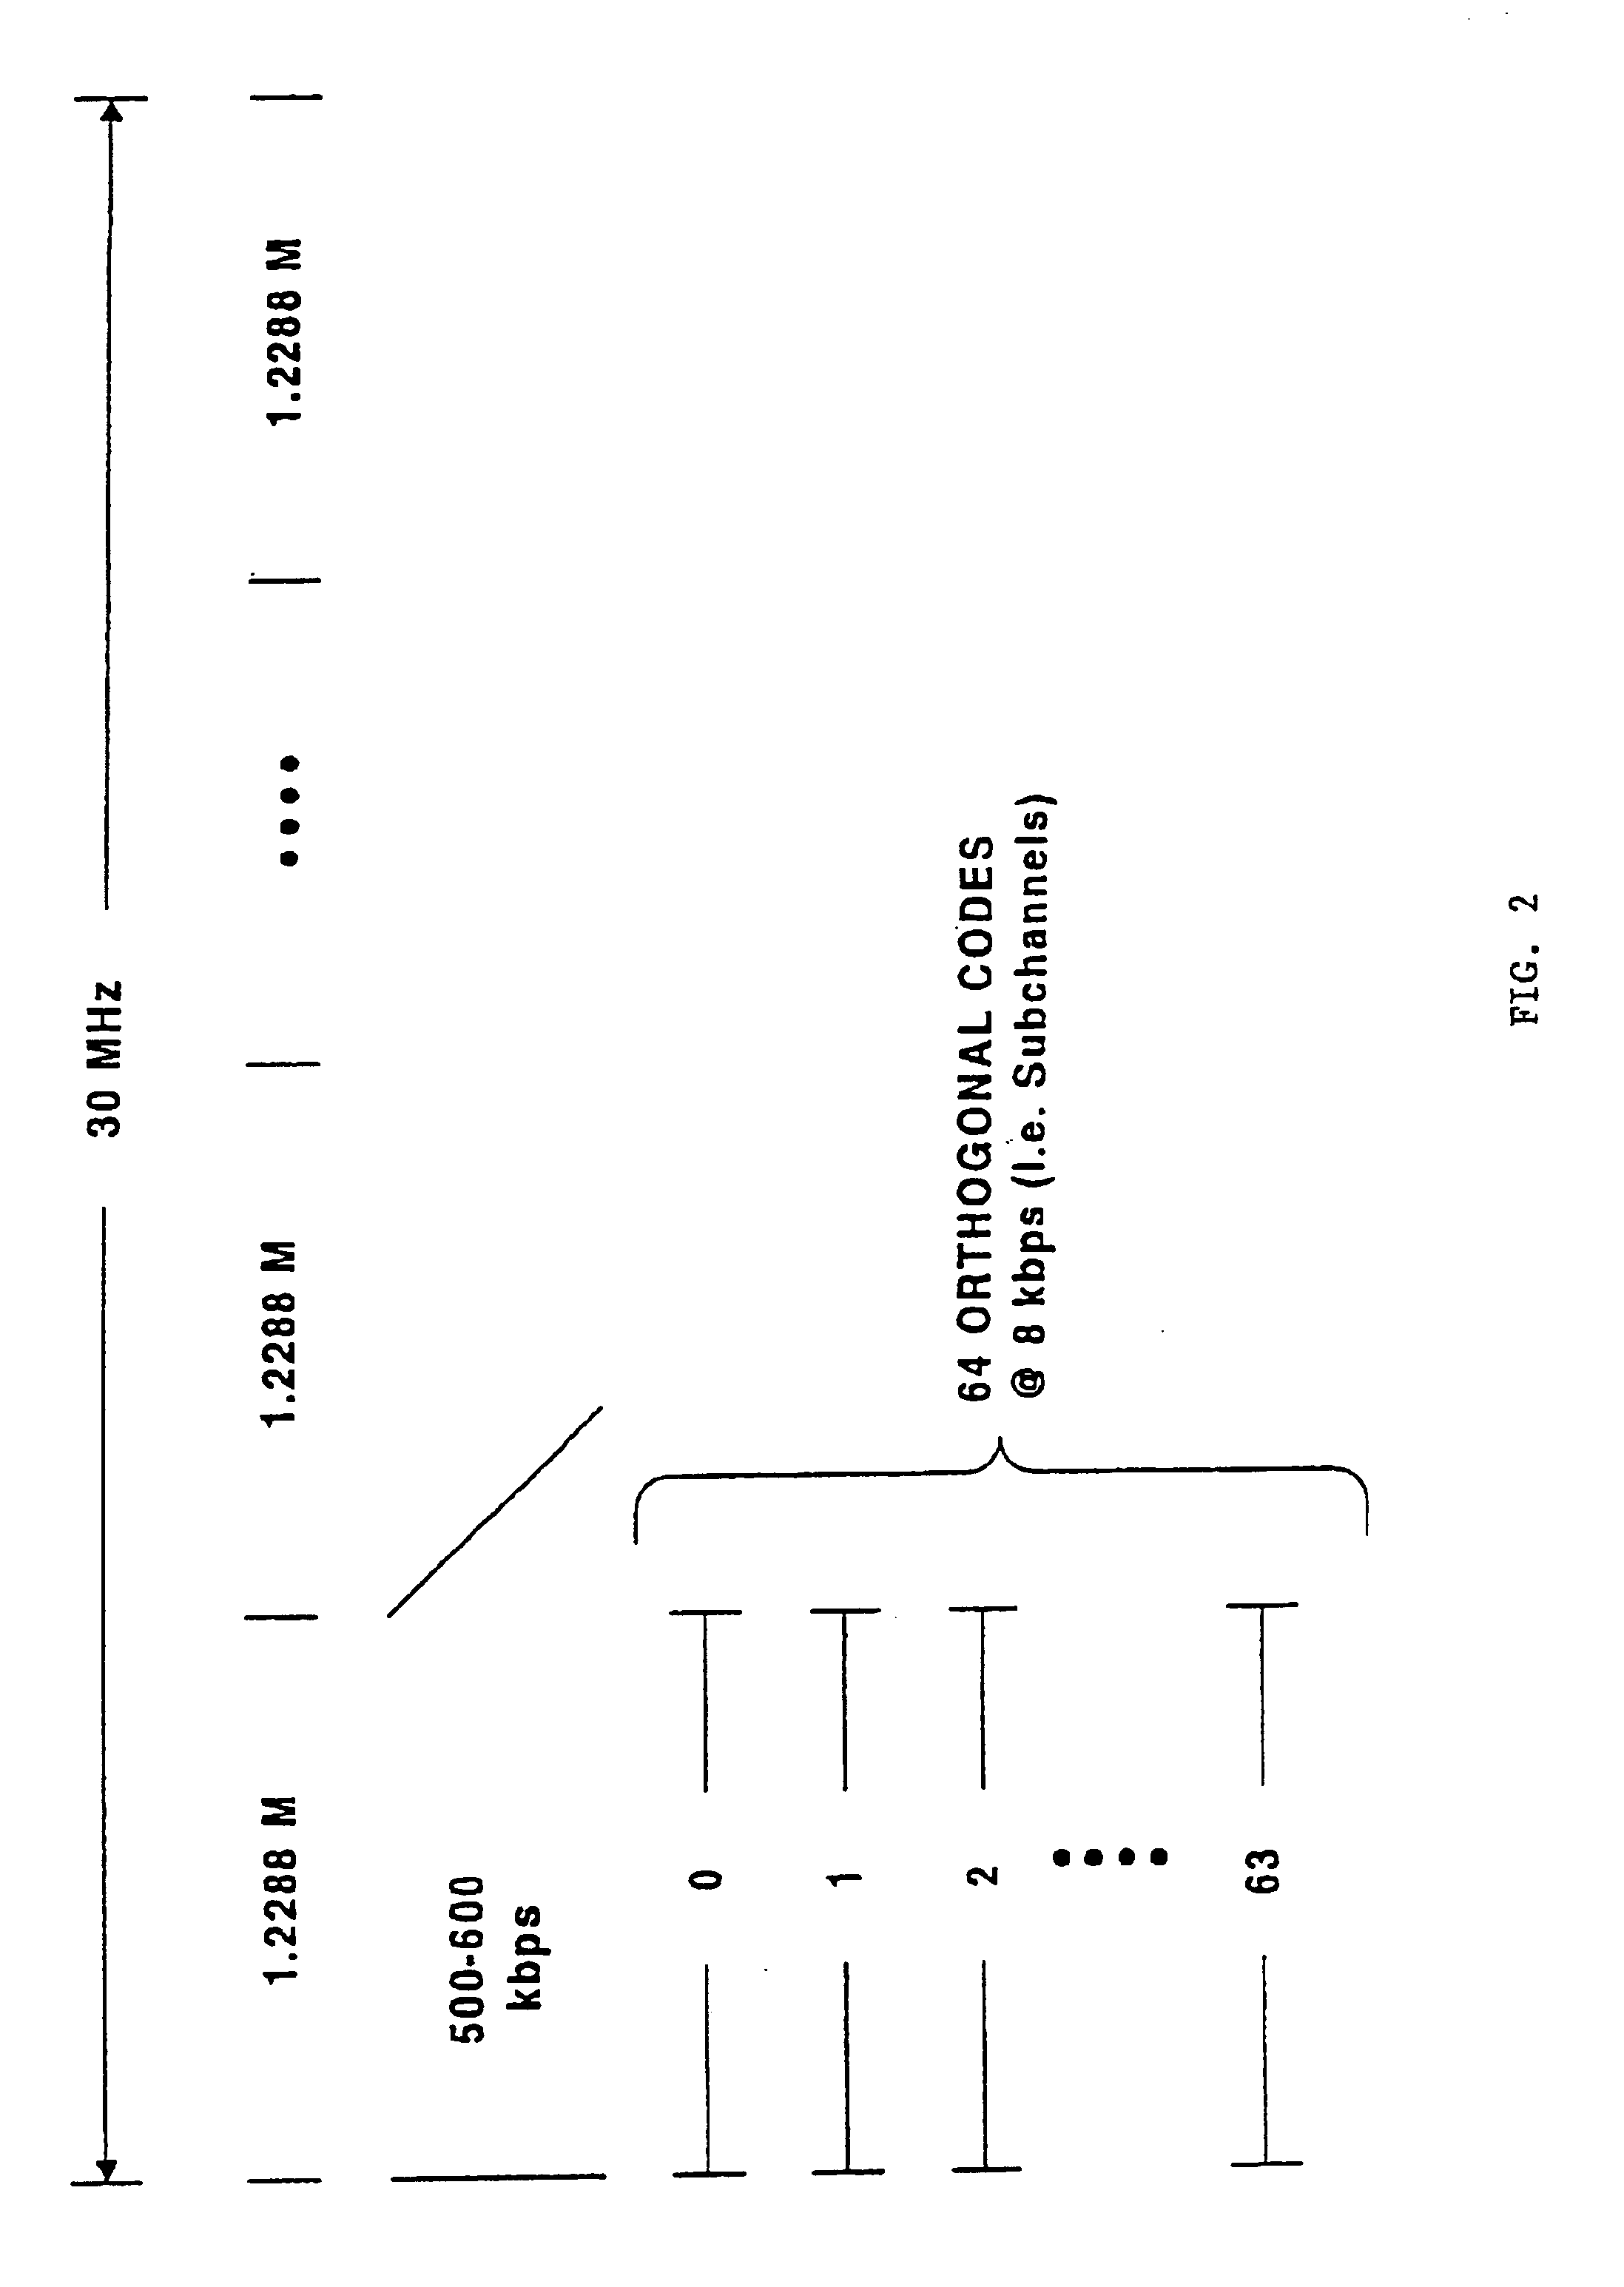 Fast acquisition of traffic channels for a highly variable data rate reverse link of a CDMA wireless communication system